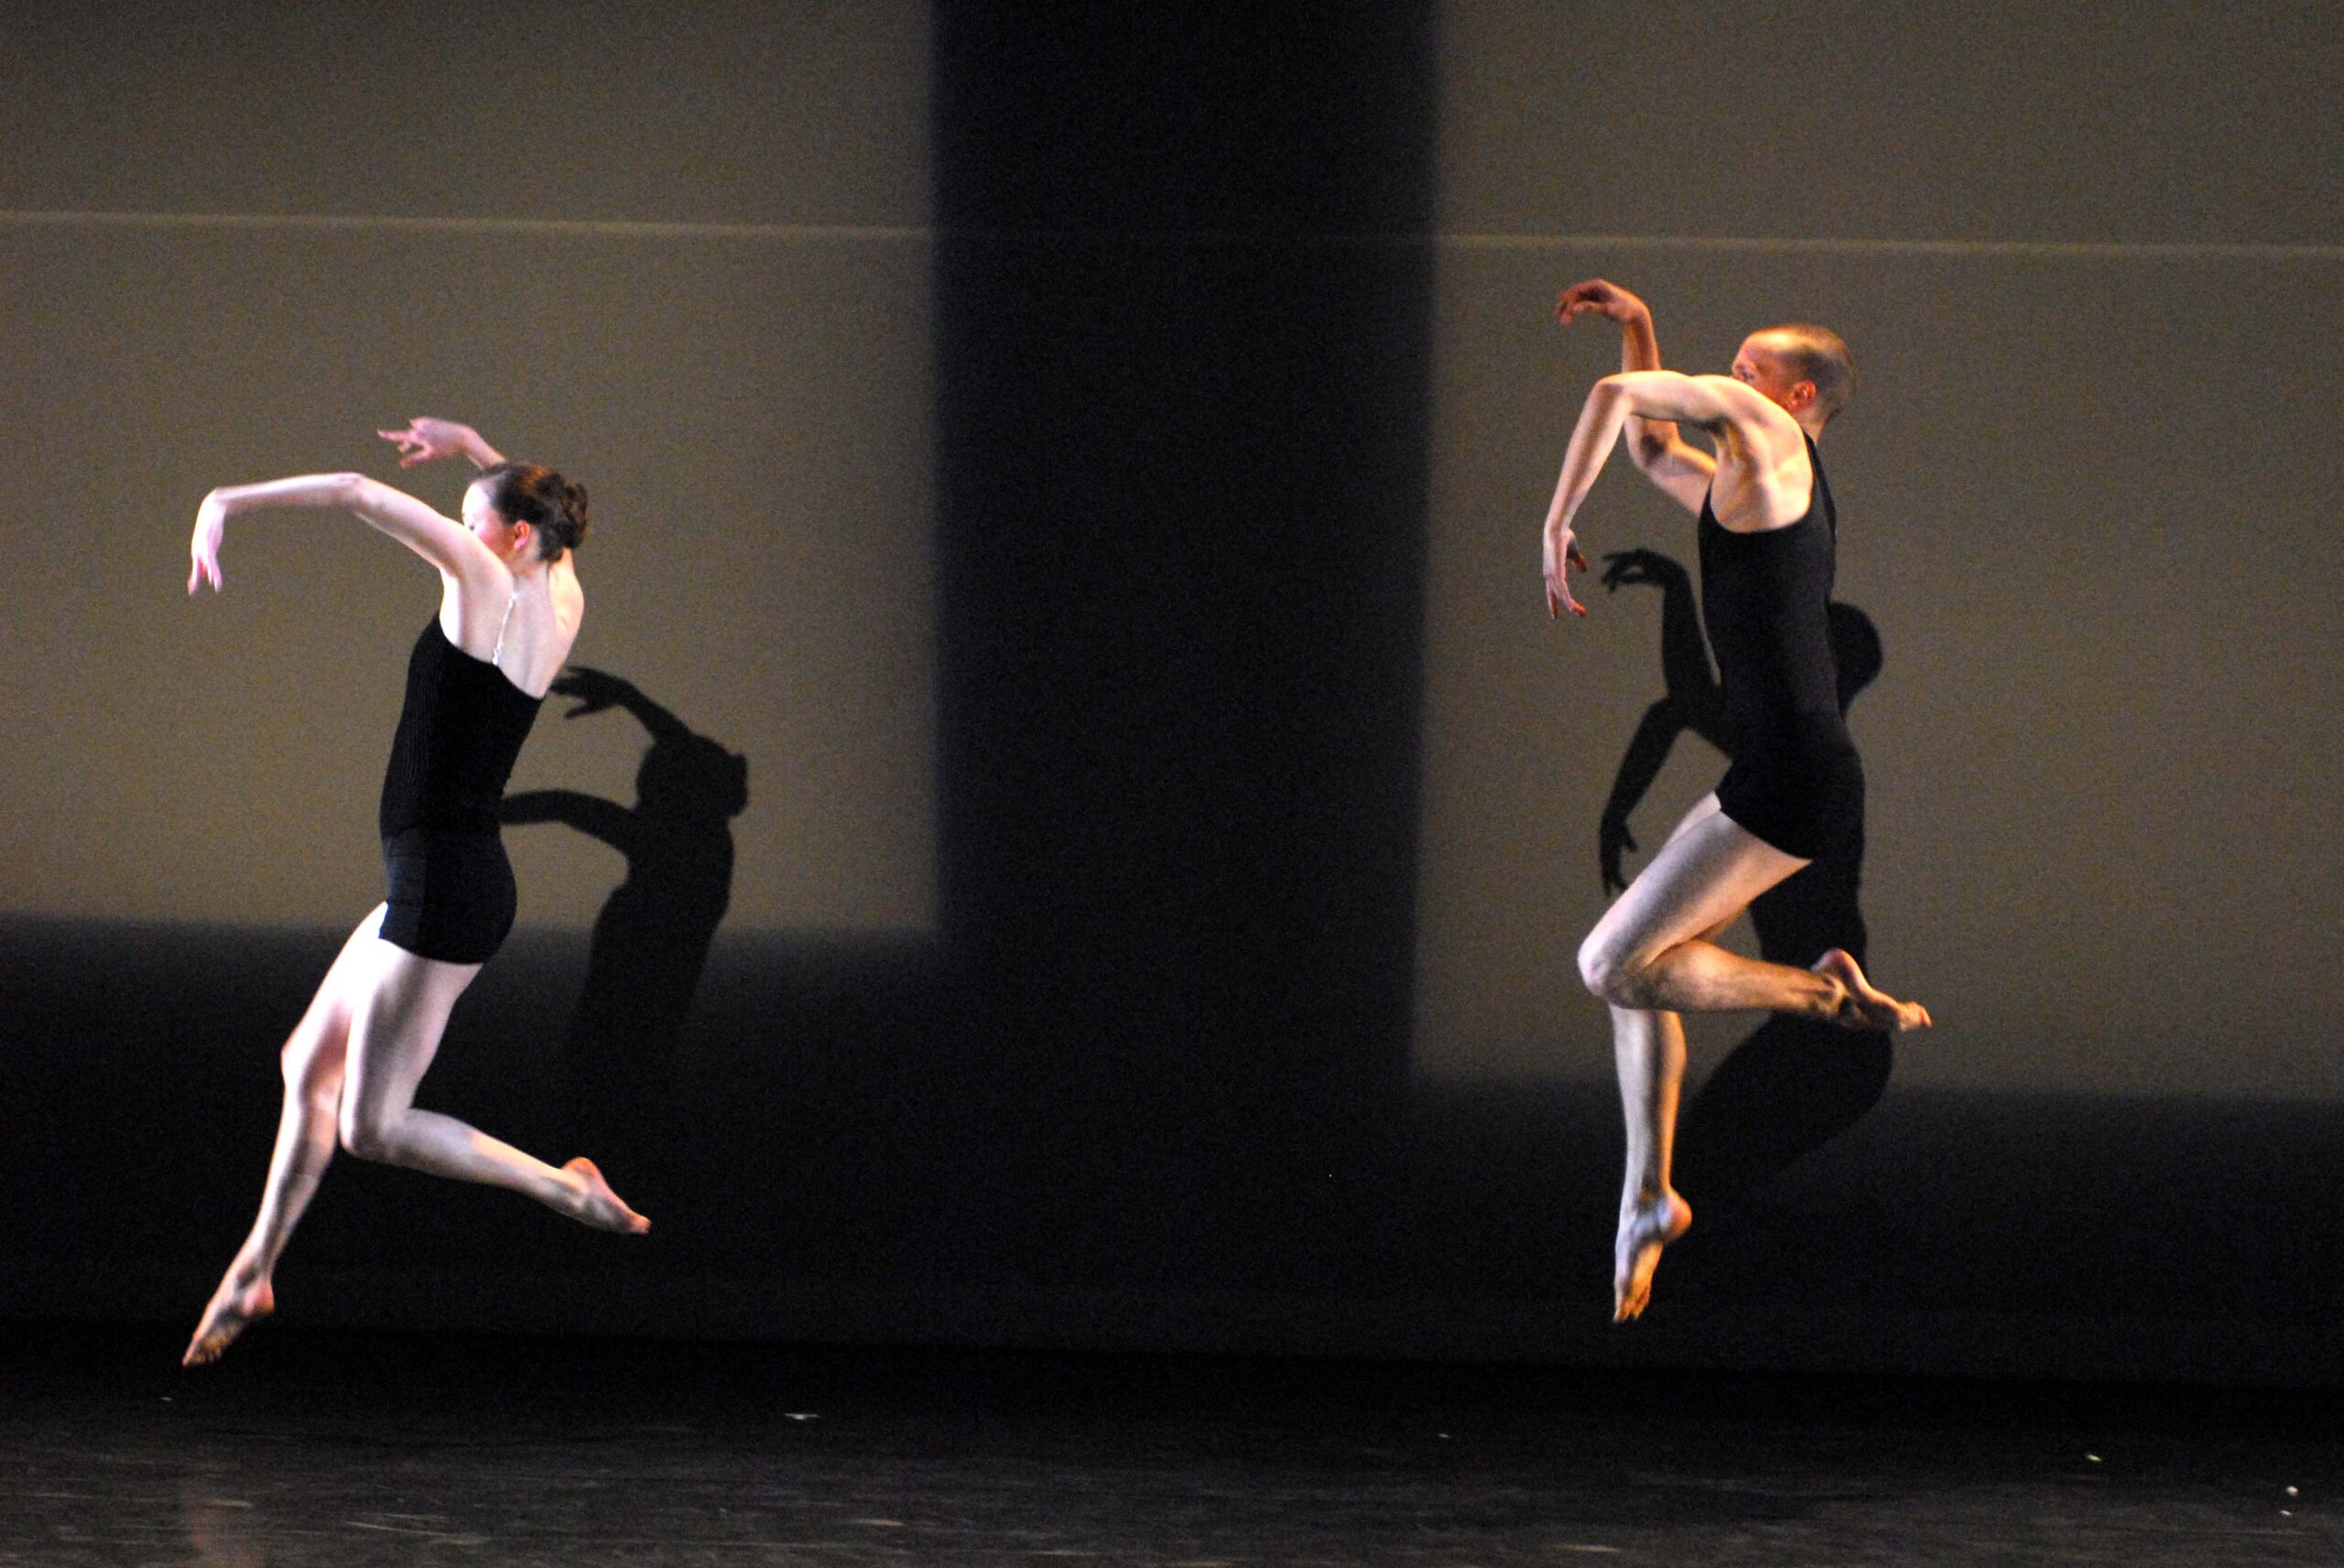 Two modern dance performers in motion on a stage